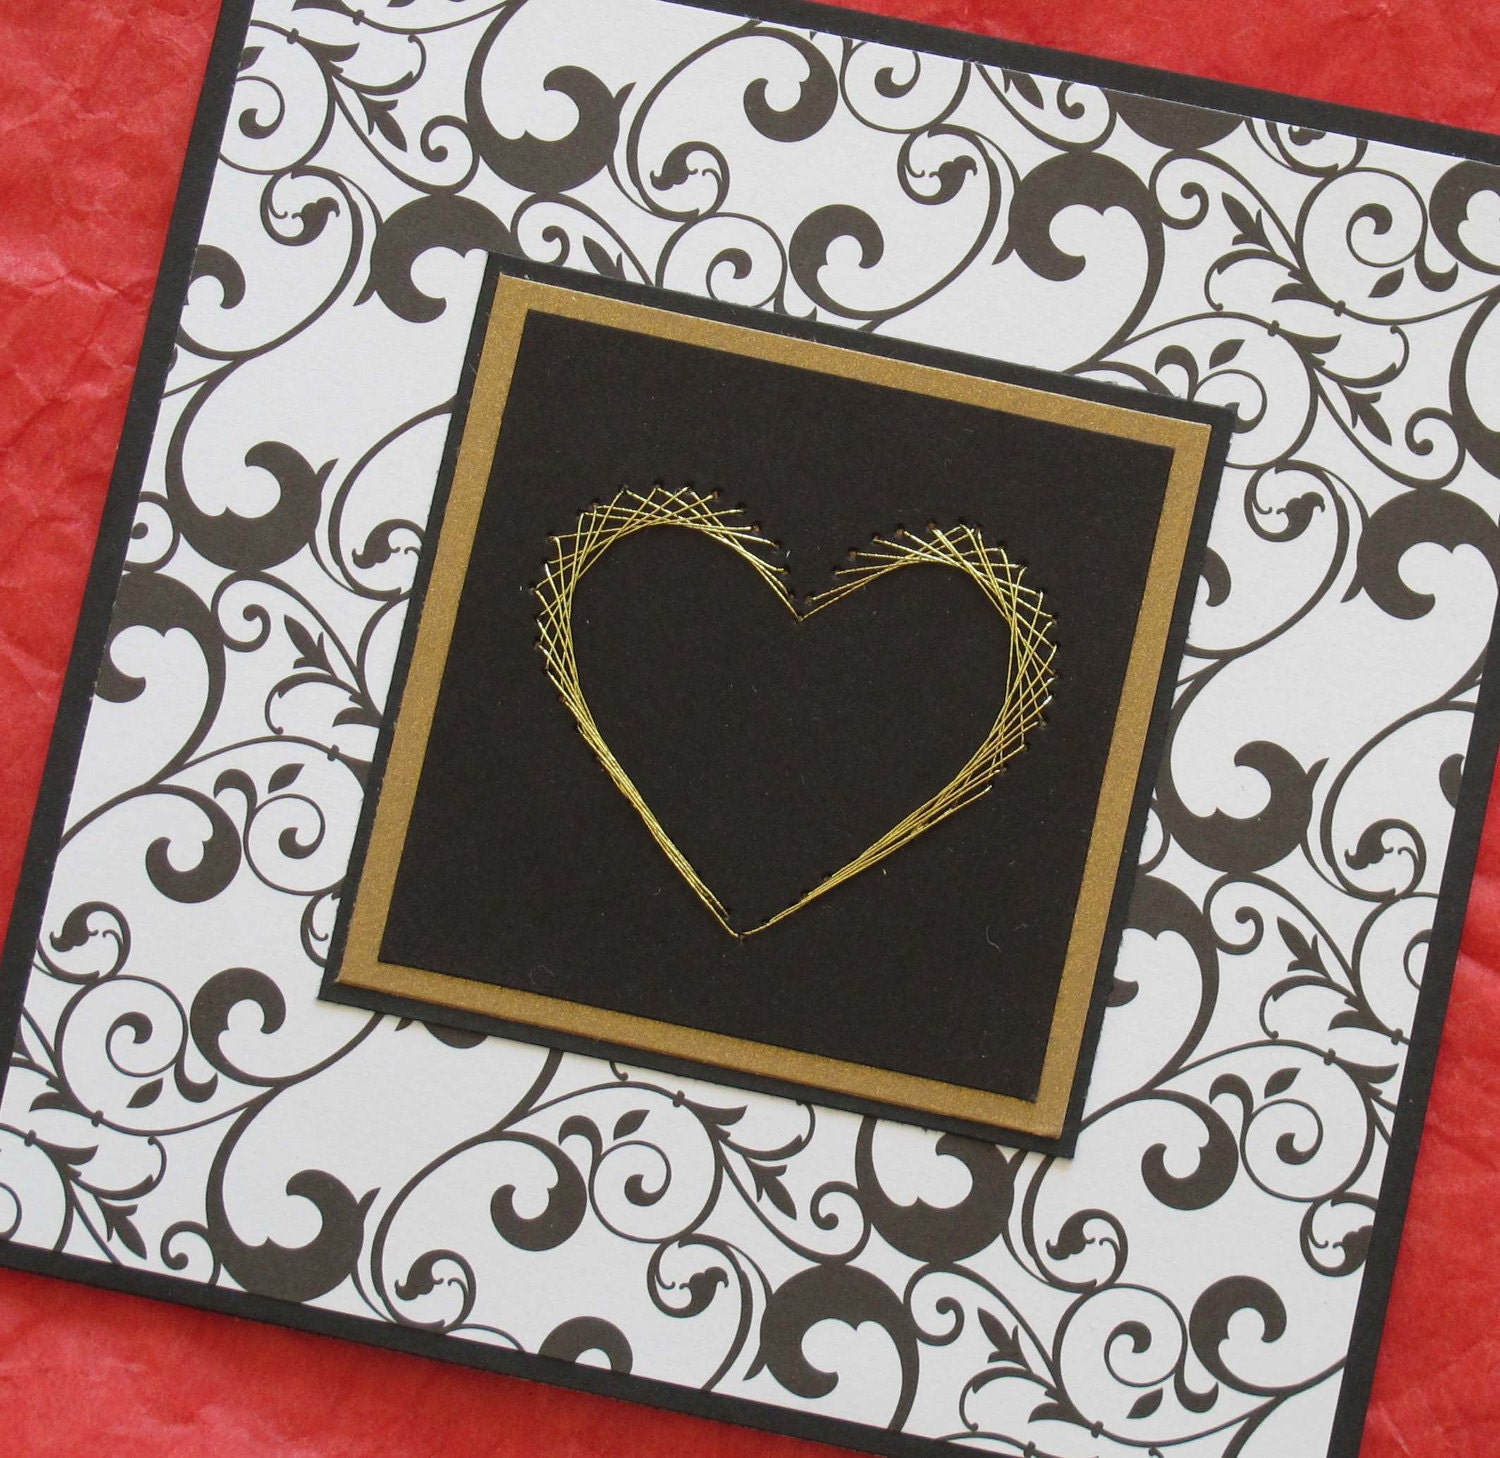 Black and white filigree wedding card with gold embroidered heart Valentines Love - SandrasCardShop